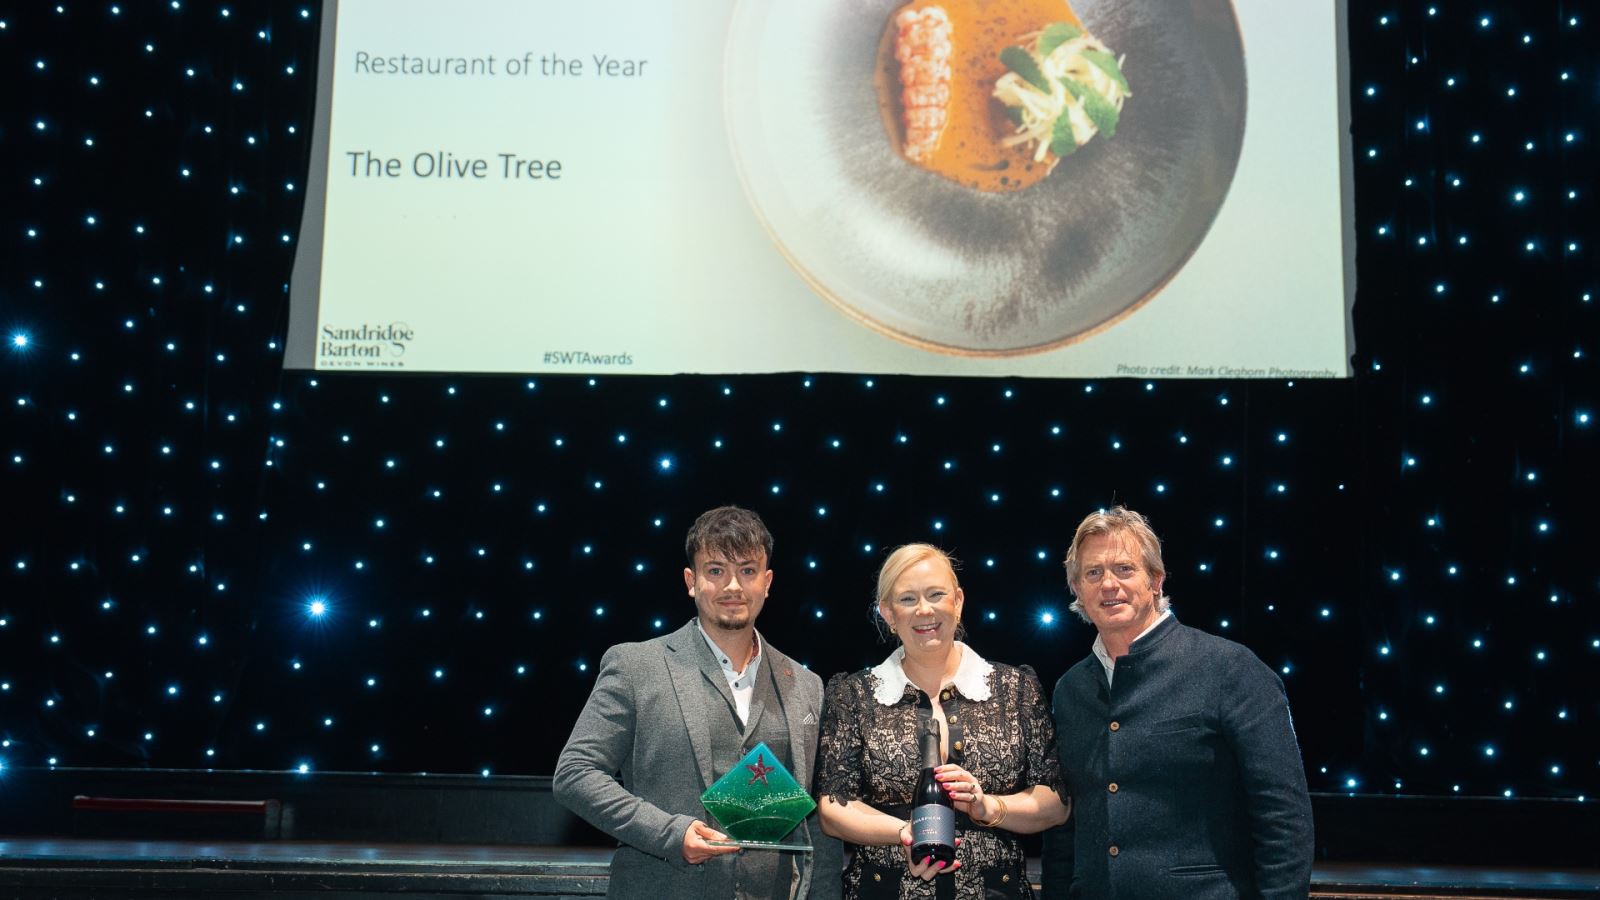 The Oliver Tree in Bath winning a South West Tourism Award